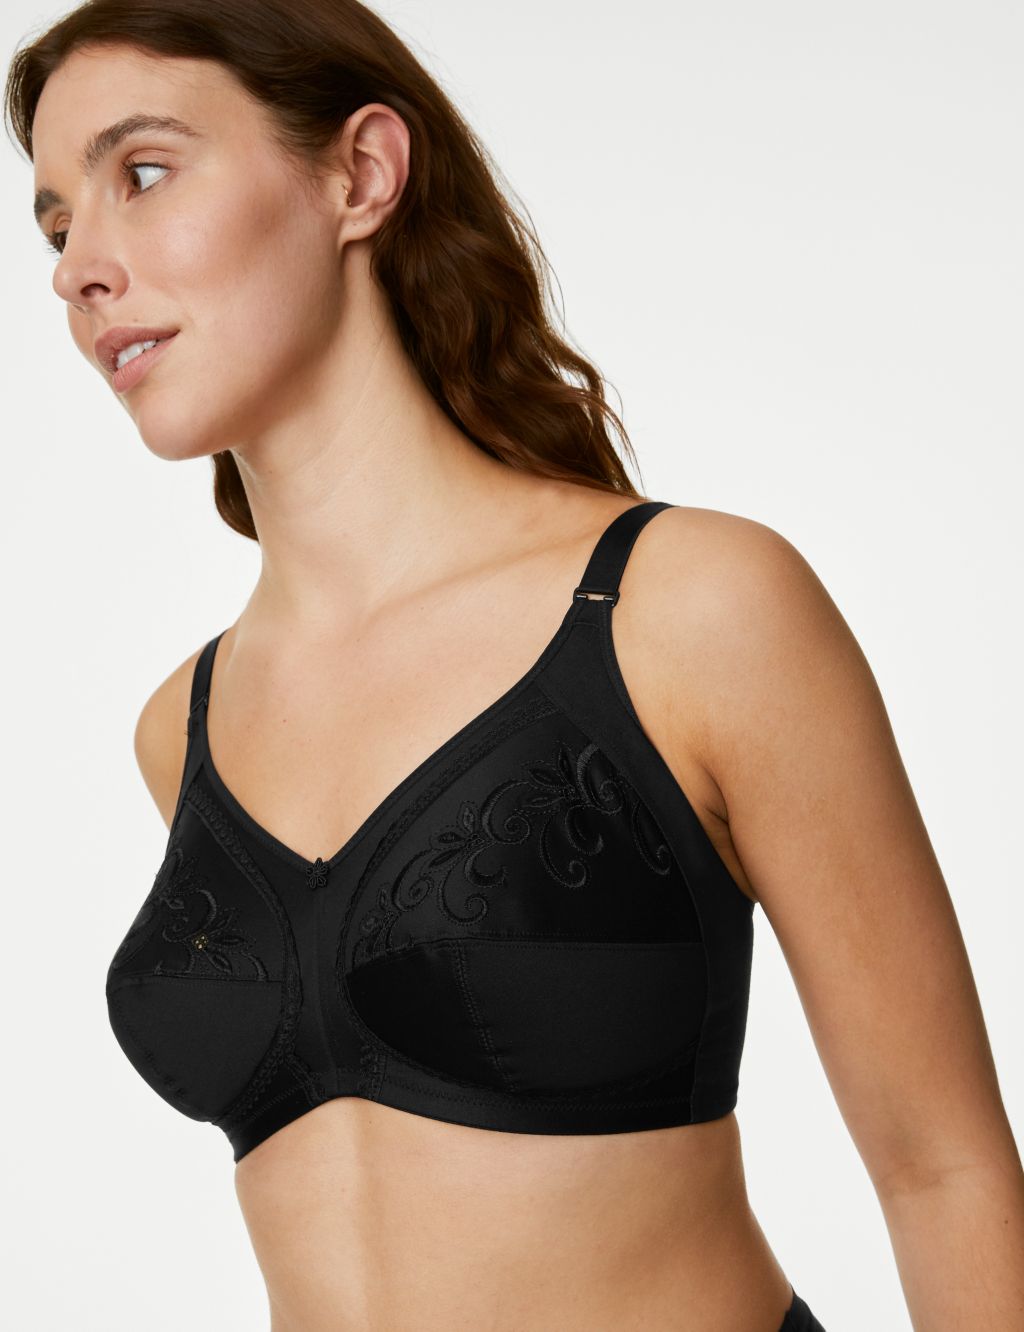 M&S Total Support Embroidered Full Cup Non Wired Bra 34-46 C to K Cups